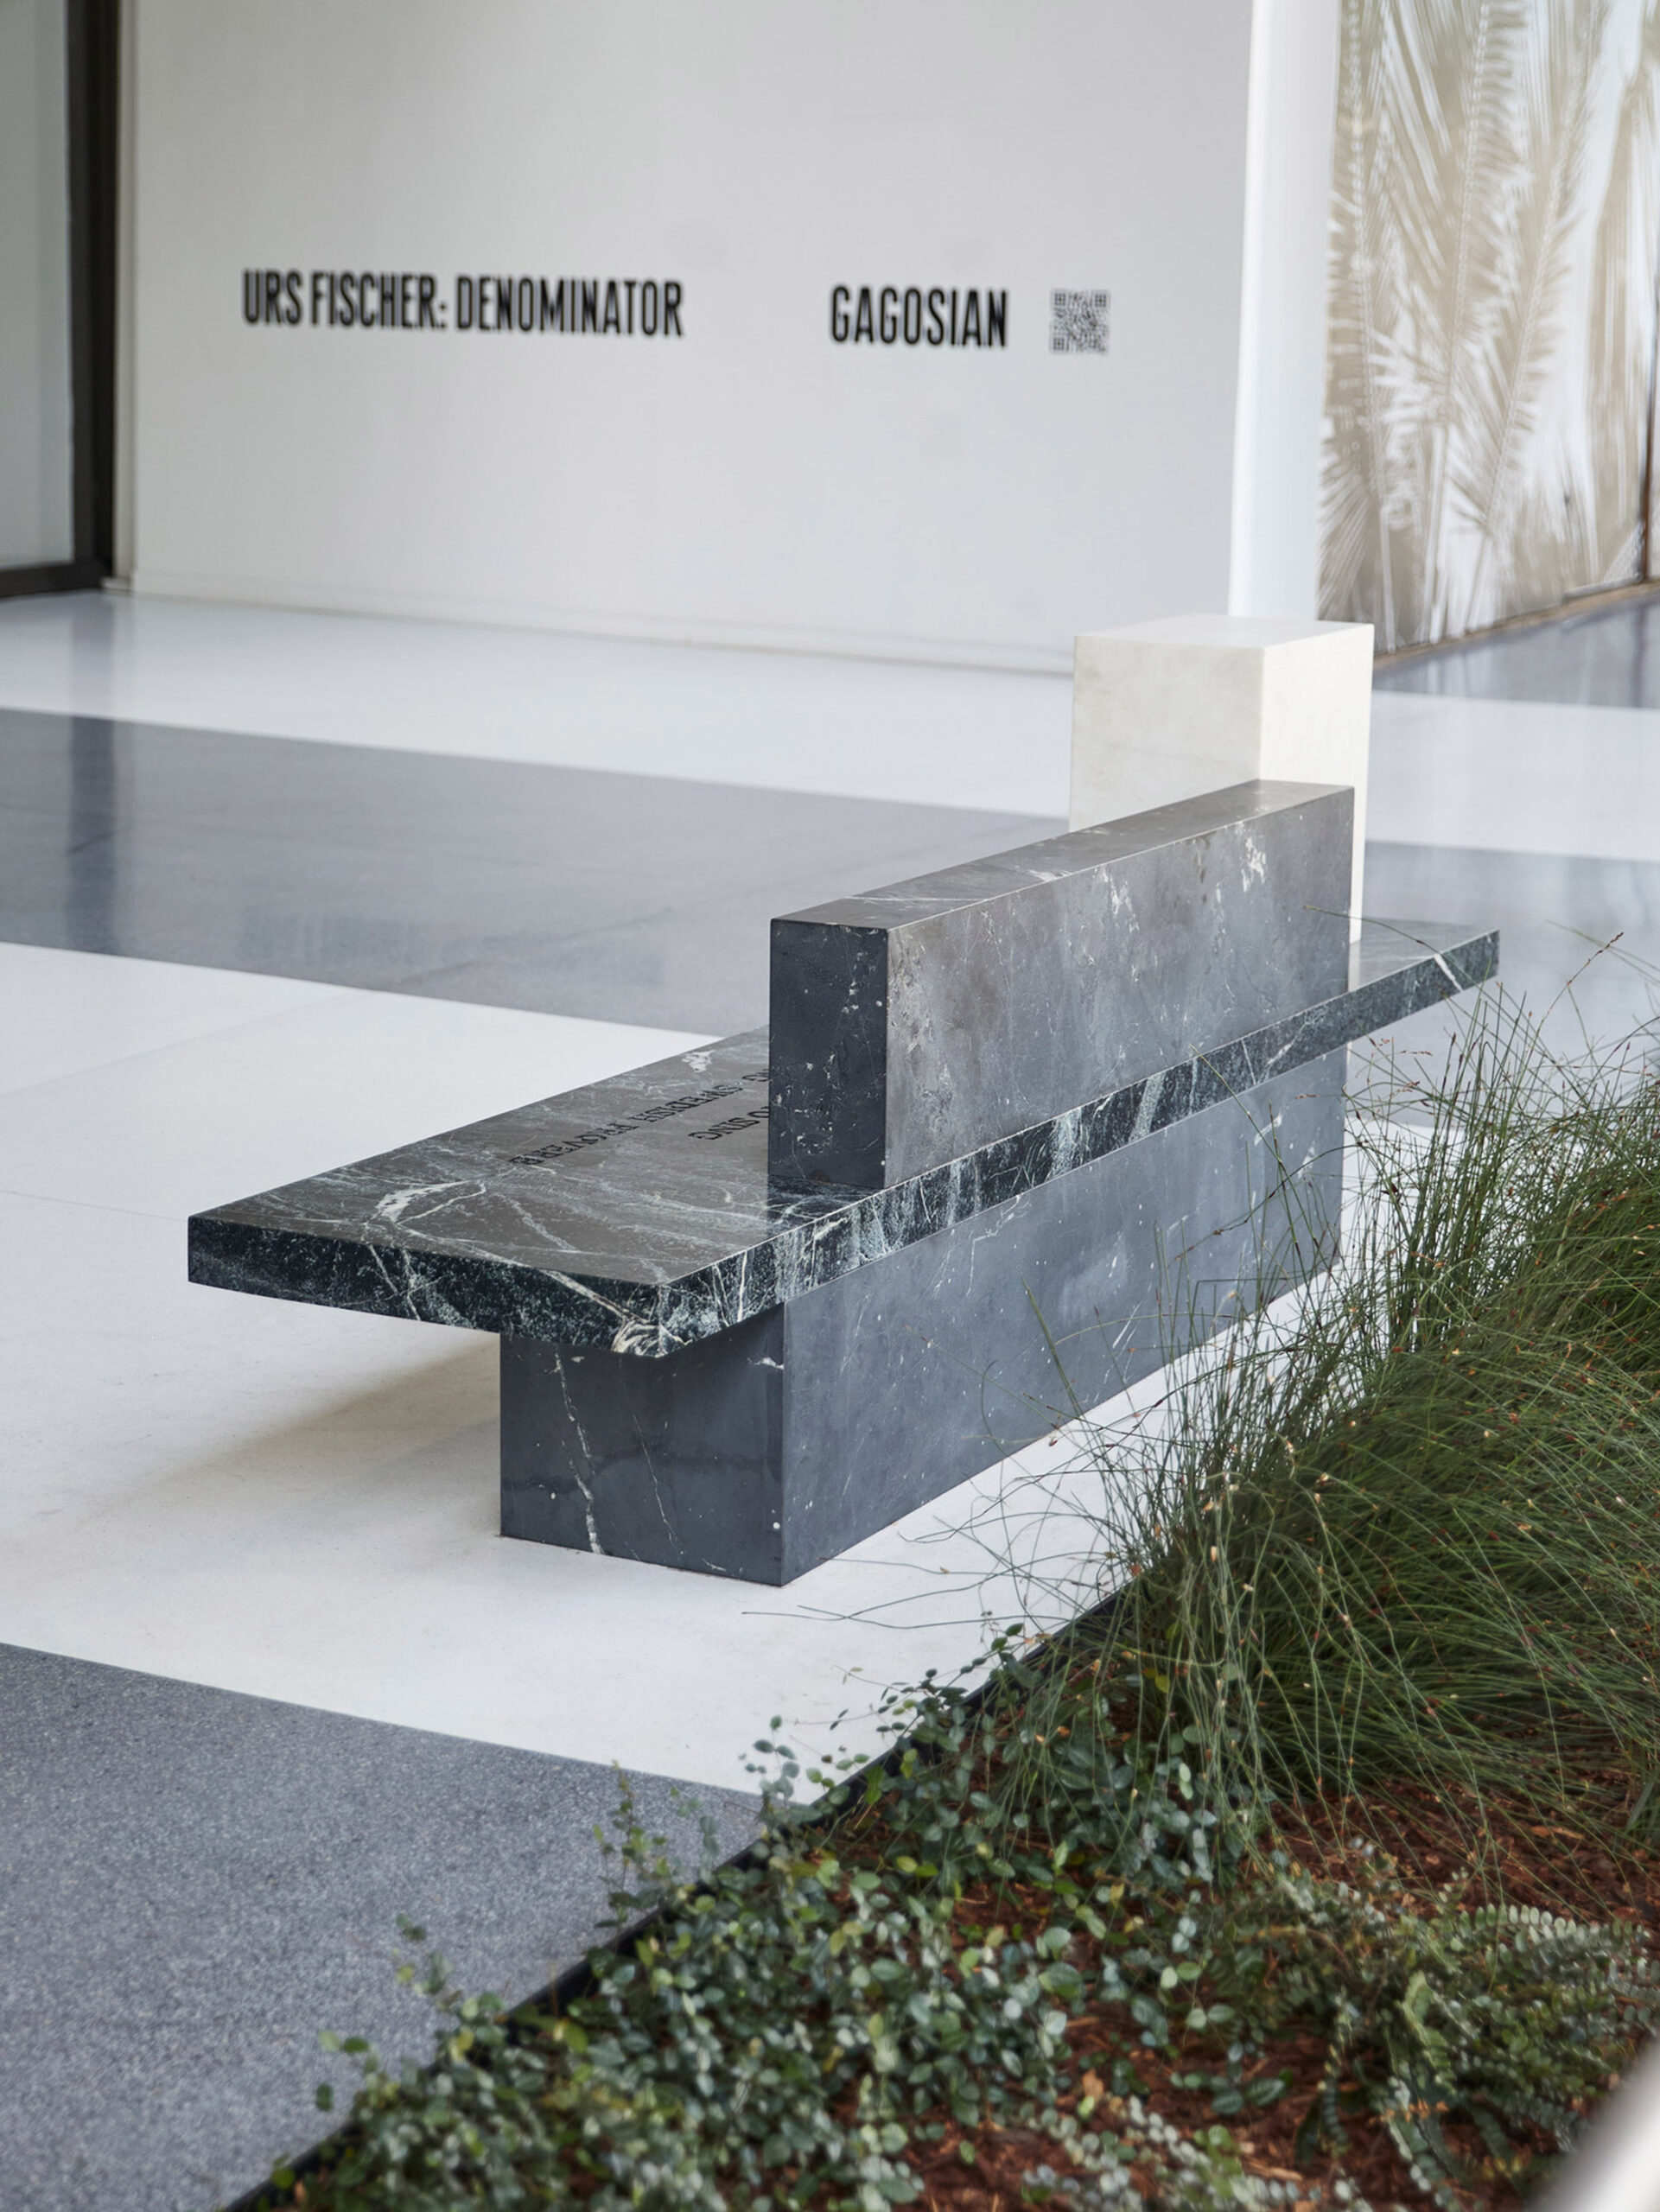 Minimalist marble bench with a contrasting geometric design, positioned in a spacious gallery with polished concrete floors. The simple, sleek lines of the bench provide a modern contrast against the organic textures of the adjacent greenery.